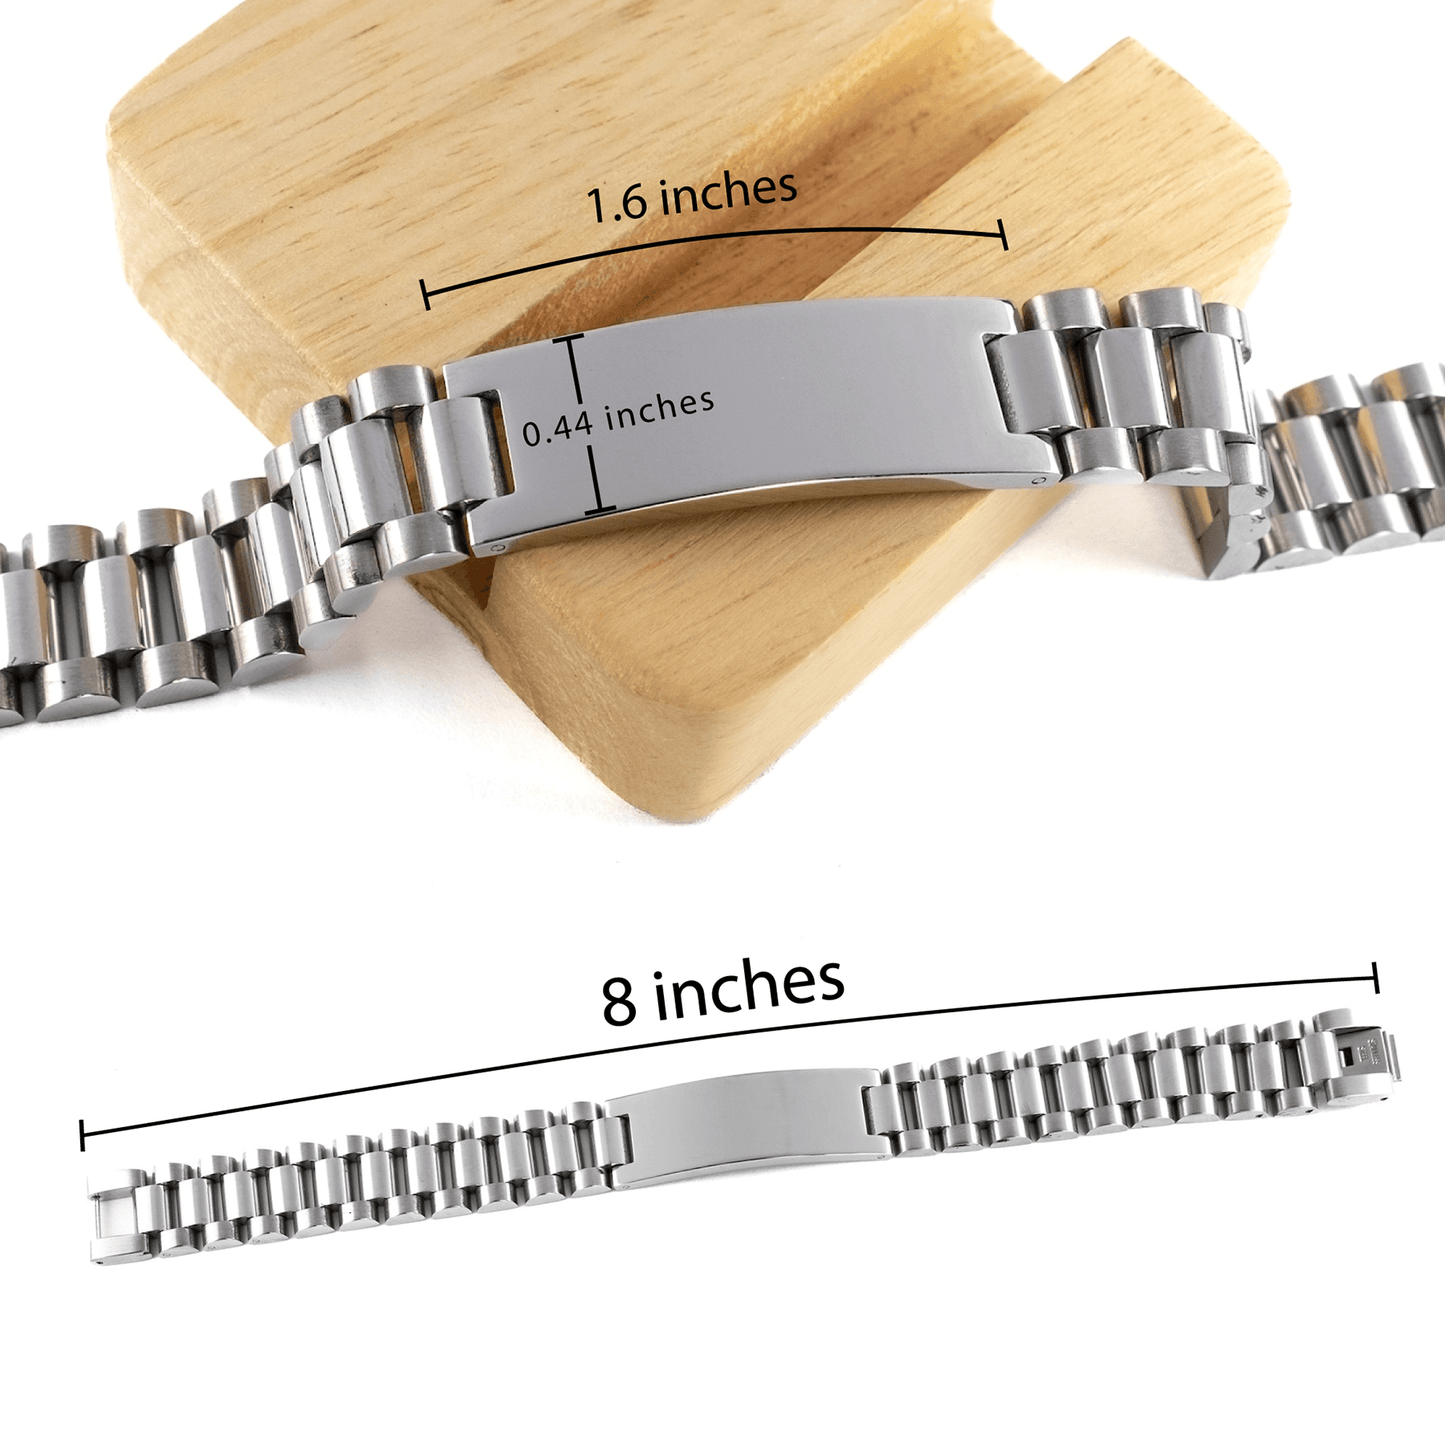 Counselor Ladder Stainless Steel Engraved Bracelet - Thanks for being who you are - Birthday Christmas Jewelry Gifts Coworkers Colleague Boss - Mallard Moon Gift Shop